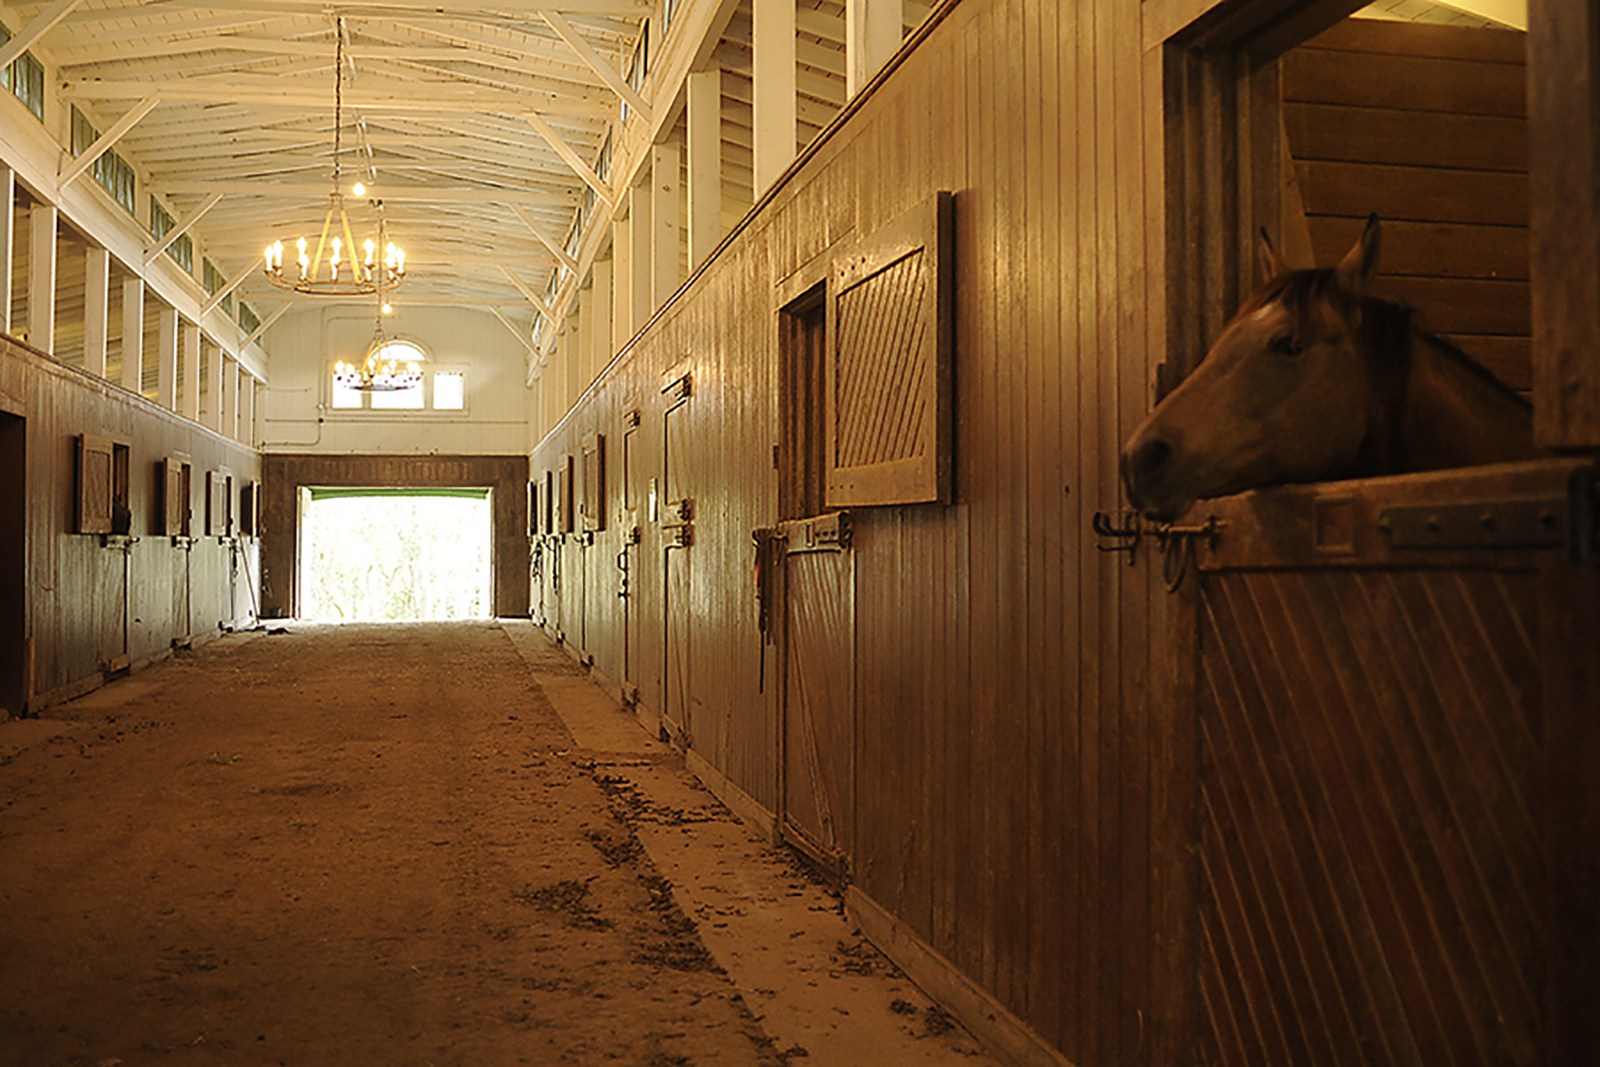 Inside view of the chandelier-lit horse barn on Milky Way Farms with a horse head peeking over a stall door to the right.